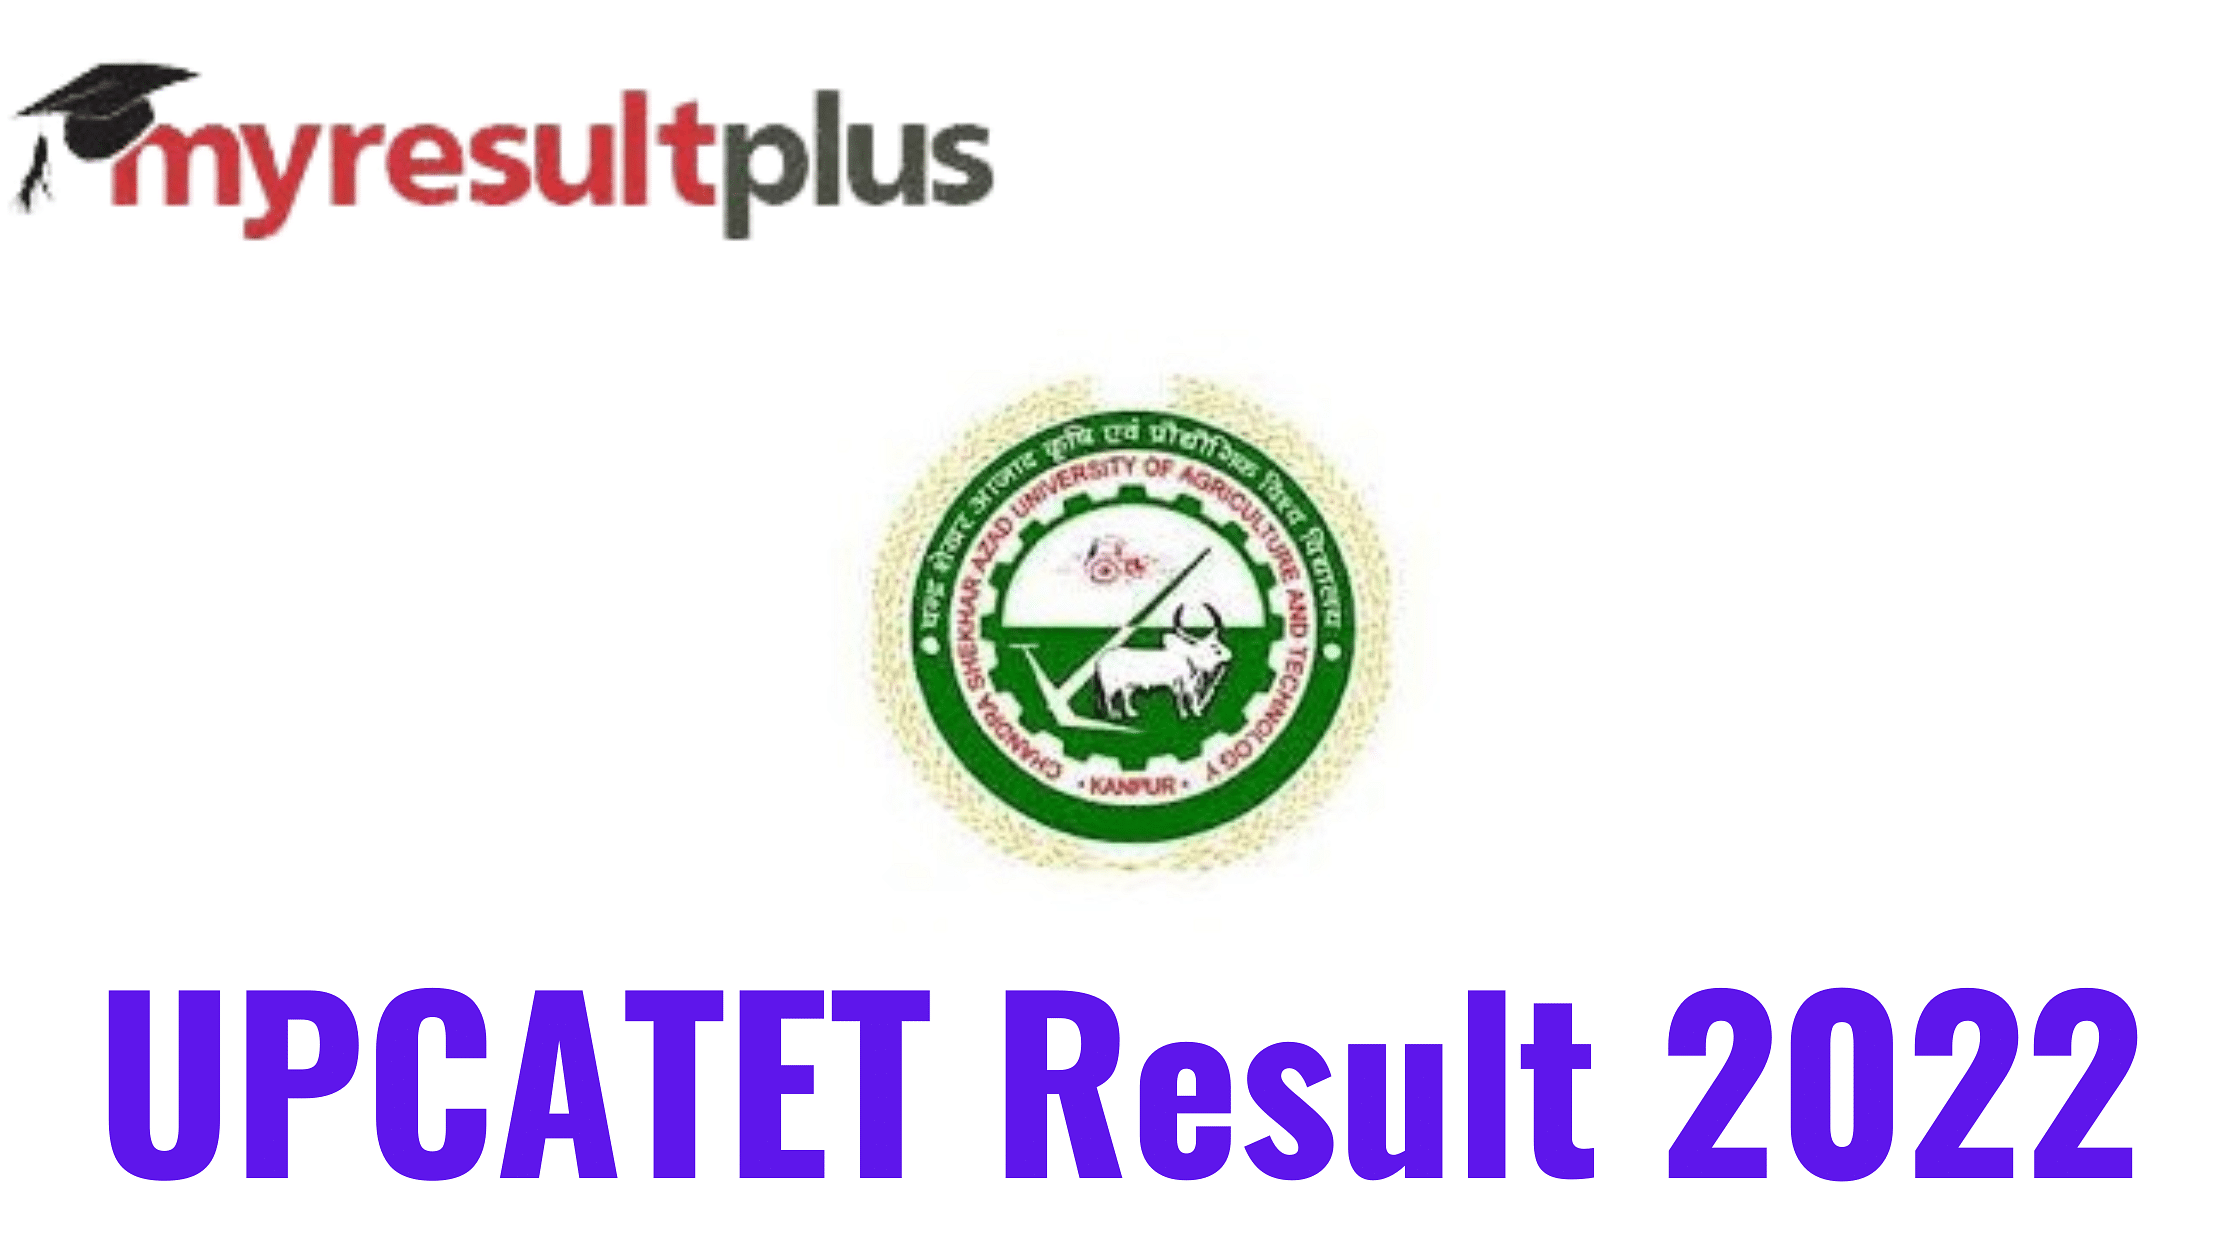 UPCATET Result 2022 Out, Here's Direct Link to Check